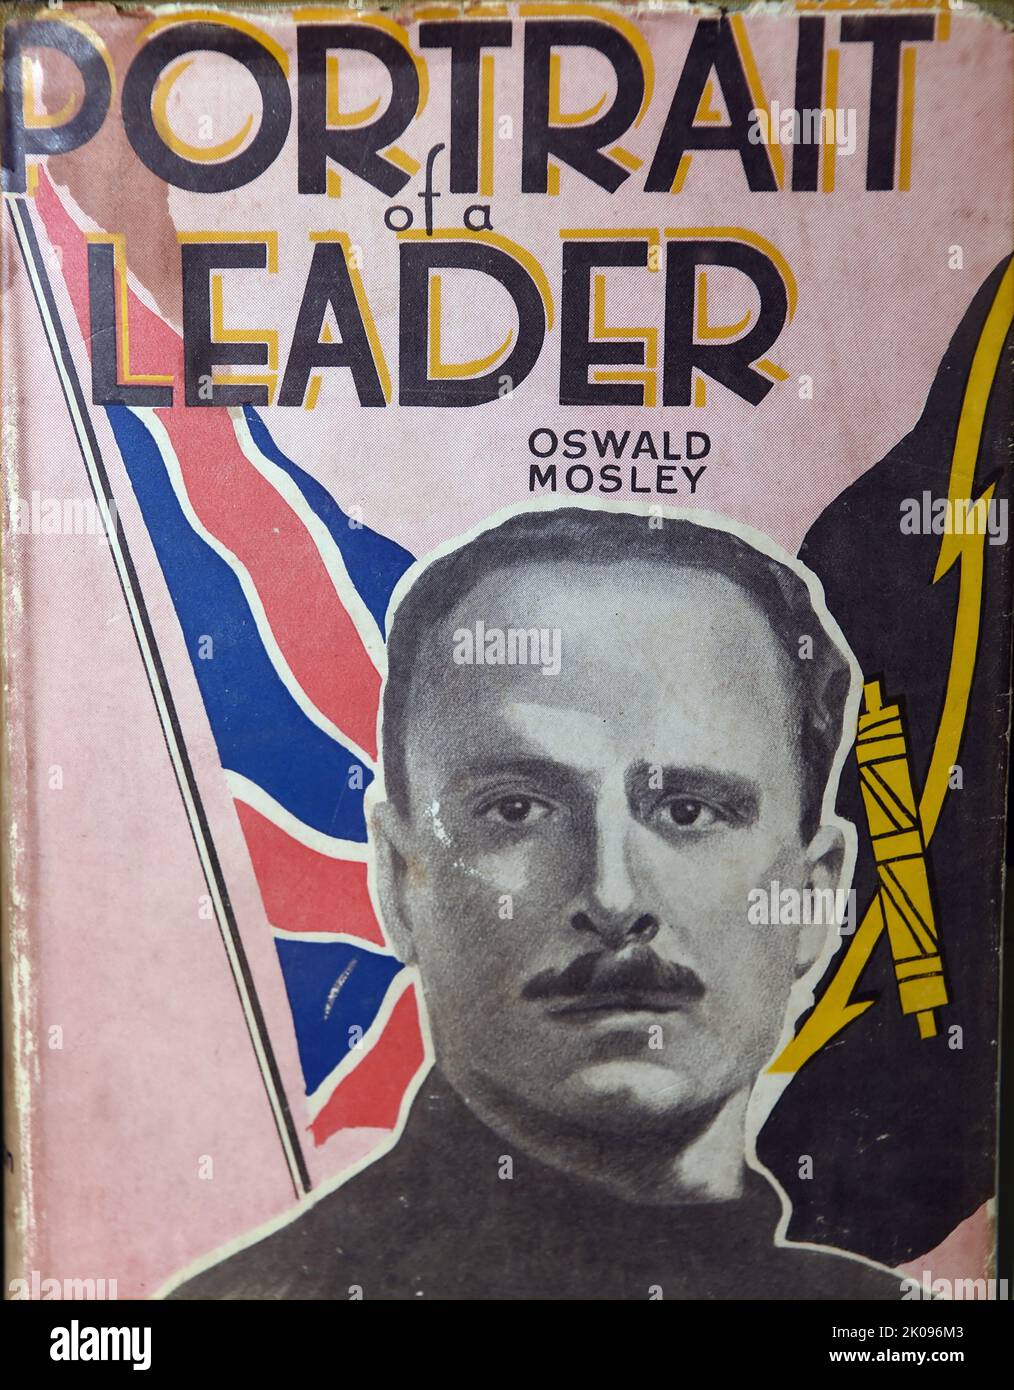 Sir Oswald Ernald Mosley, 6th Baronet (16 November 1896 - 3 December 1980) was a British politician who rose to fame in the 1920s as a Member of Parliament. Later in the 1930s, having become disillusioned with mainstream politics, became the leader of the British Union of Fascists (BUF). Stock Photo